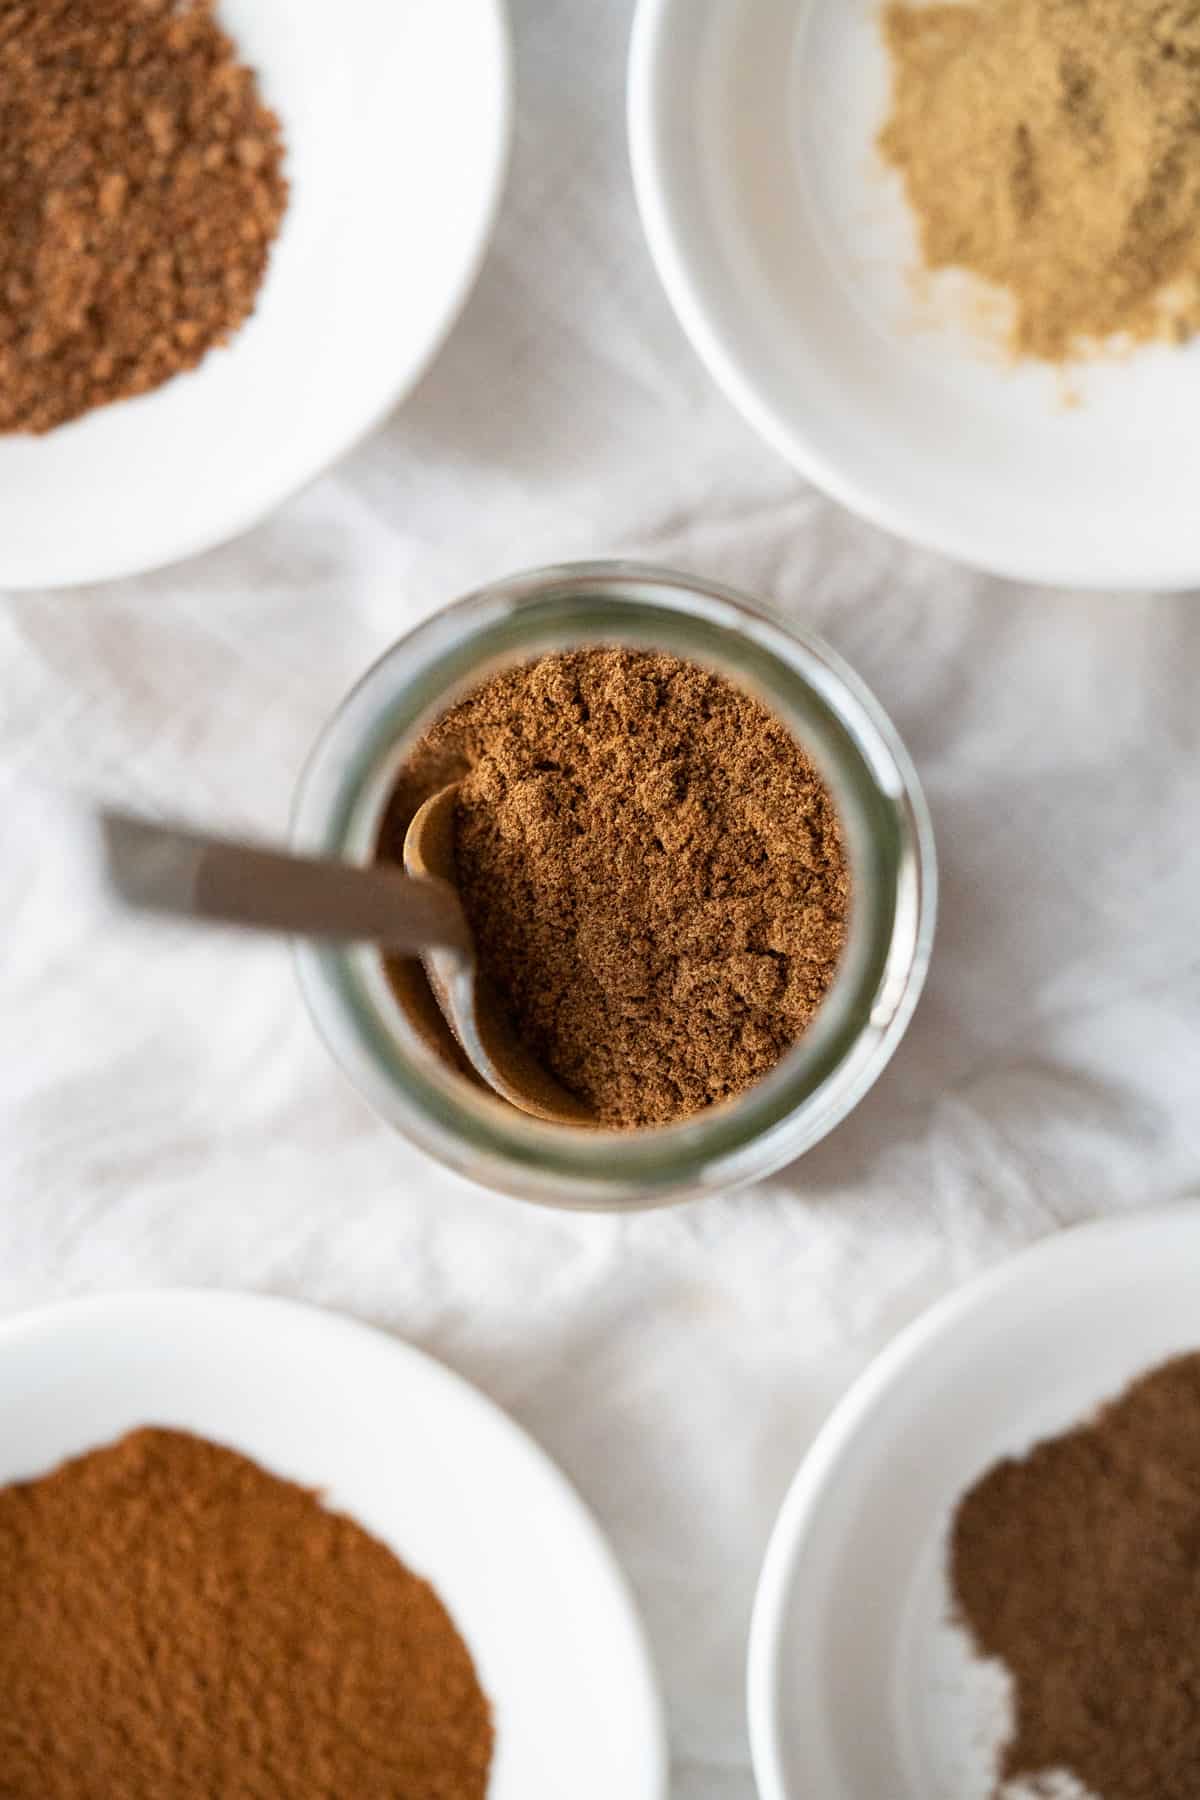 Close up of the pumpkin spice mix to show its rich brown color.